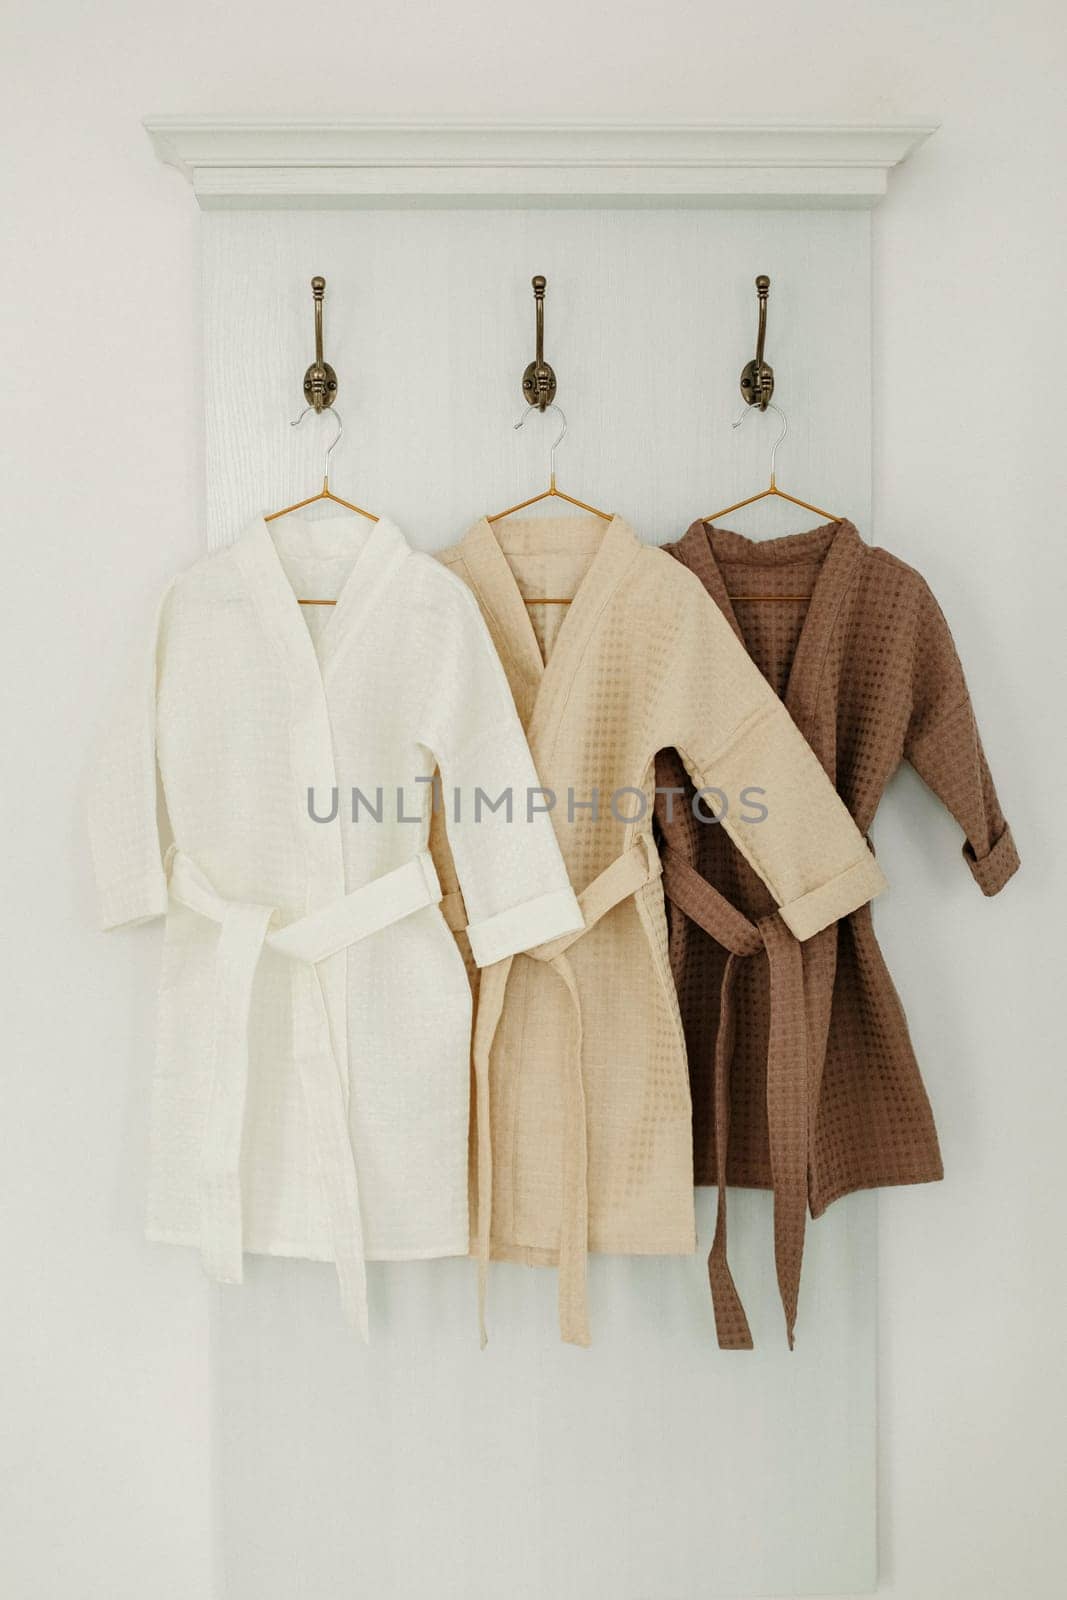 Three linen robes of different colors hang on a hanger in the bathroom. by Sd28DimoN_1976